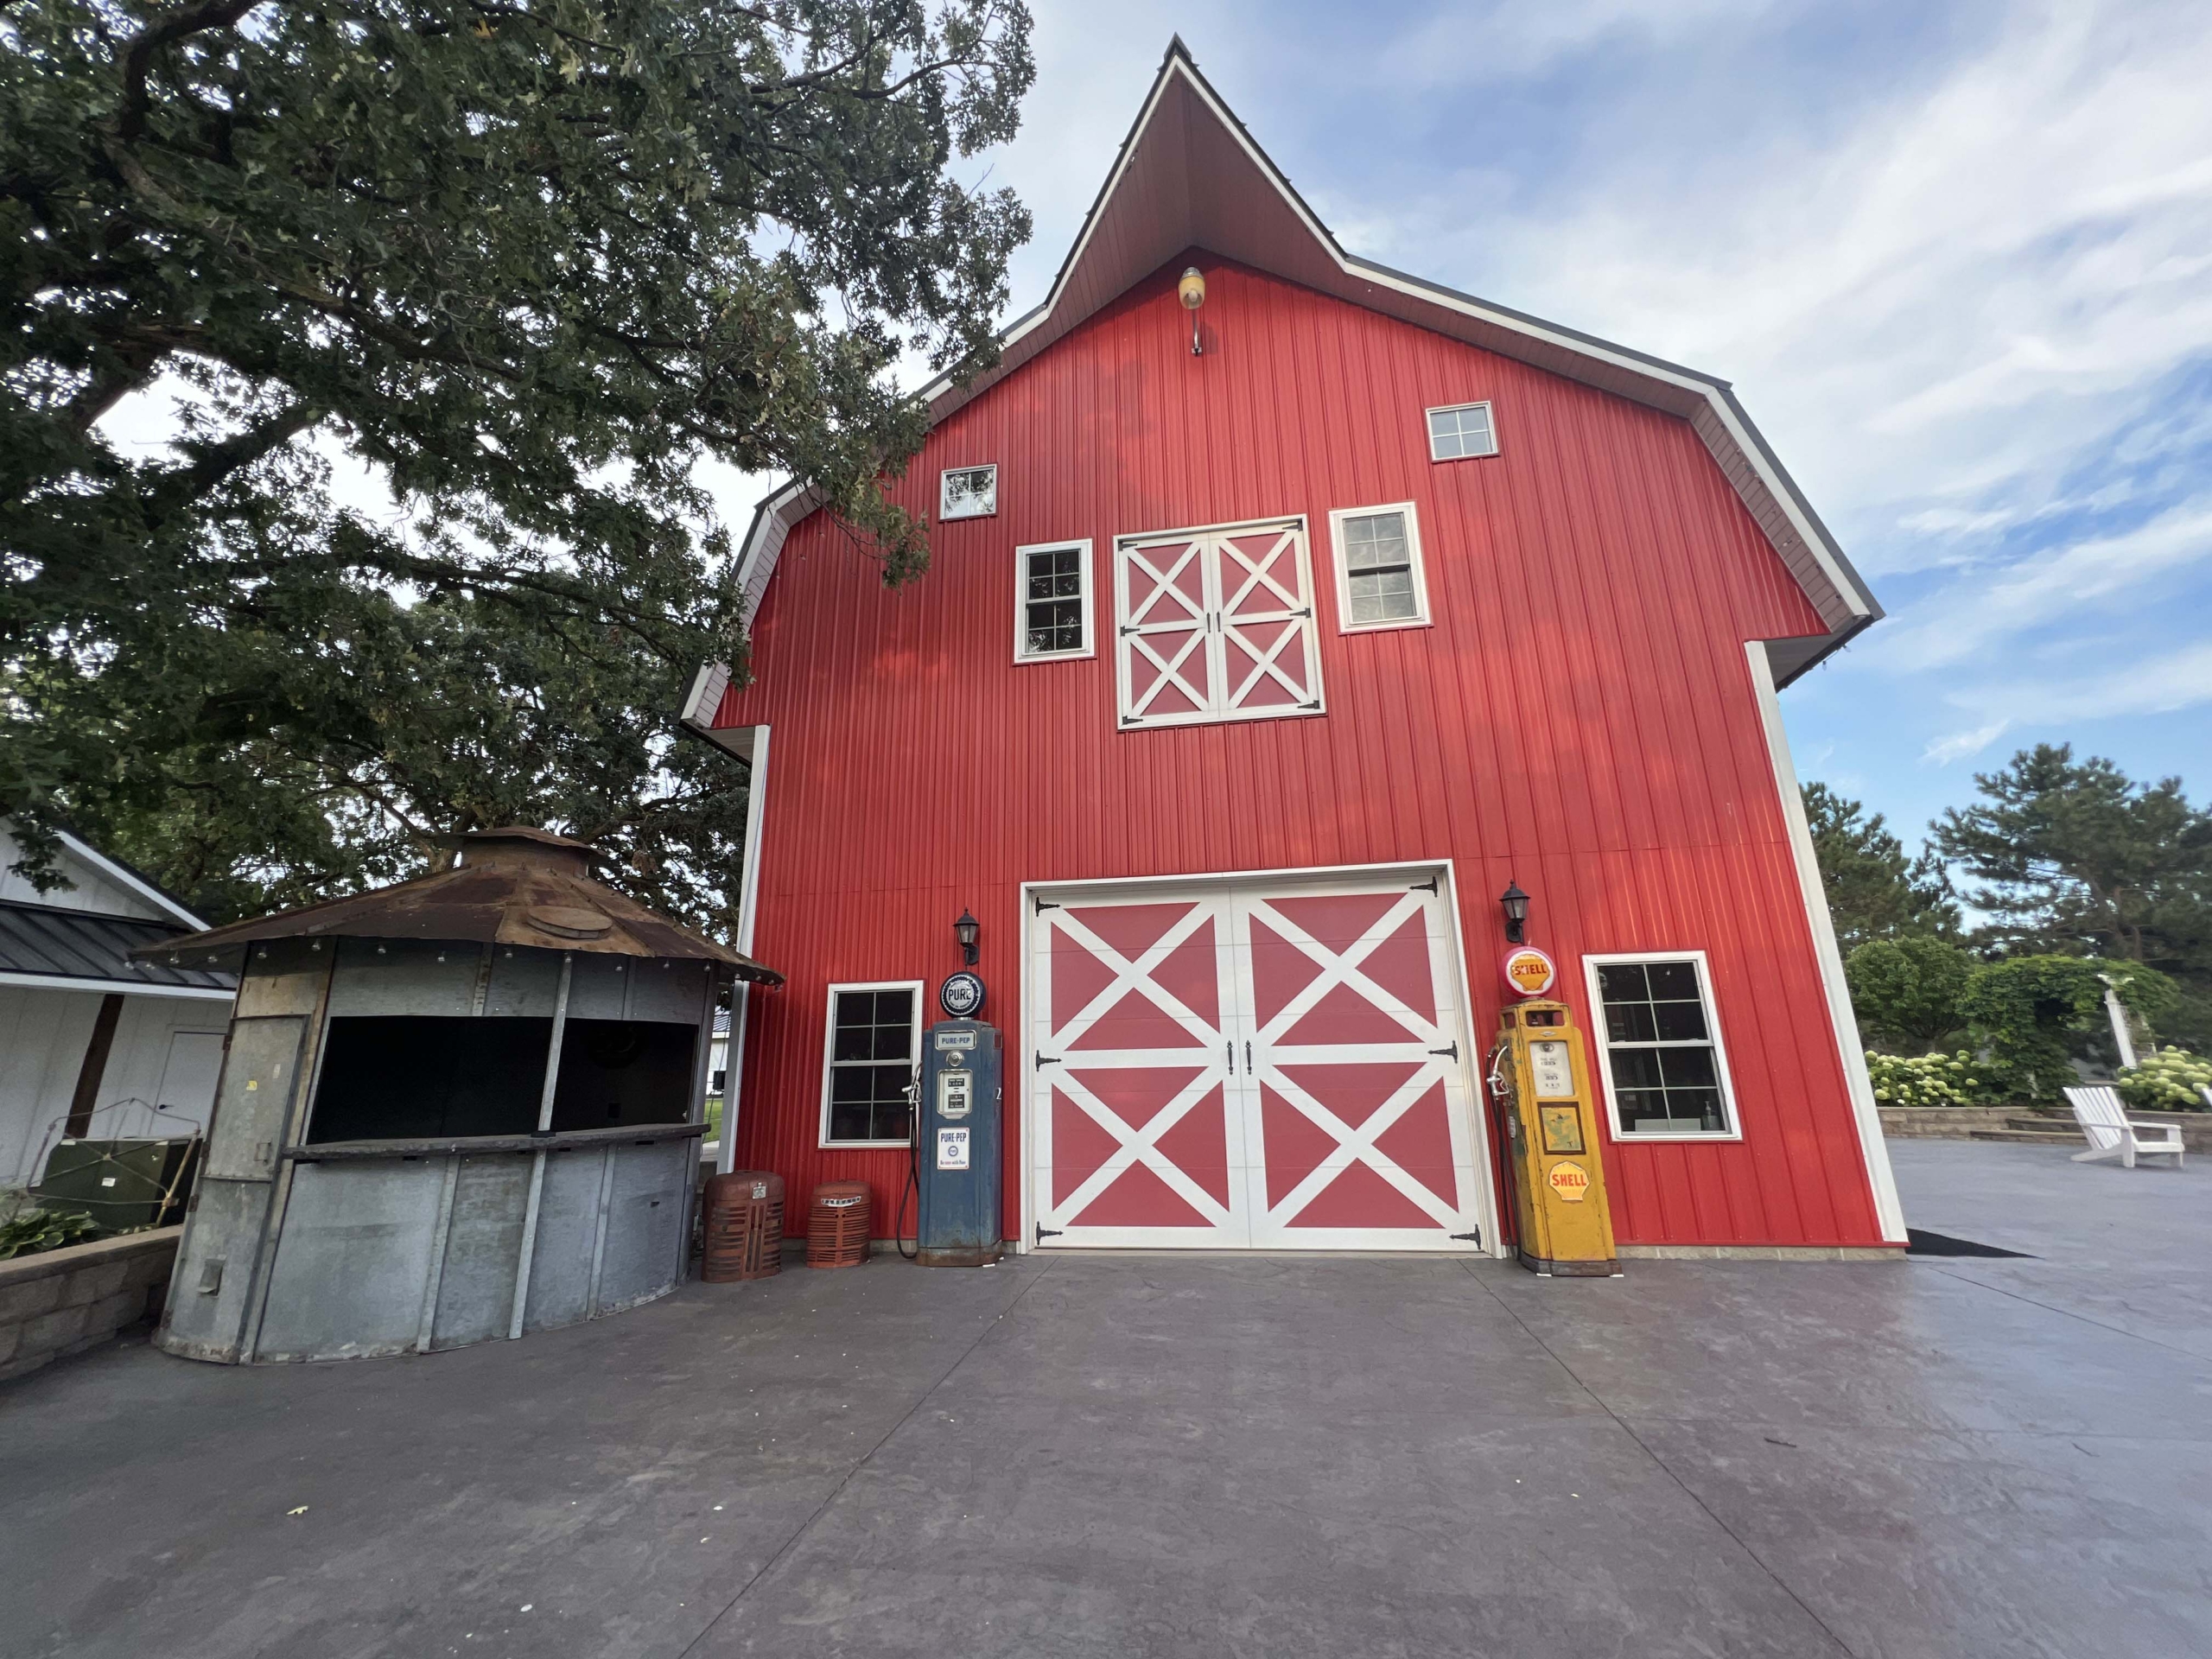 Exterior front view of the Barn